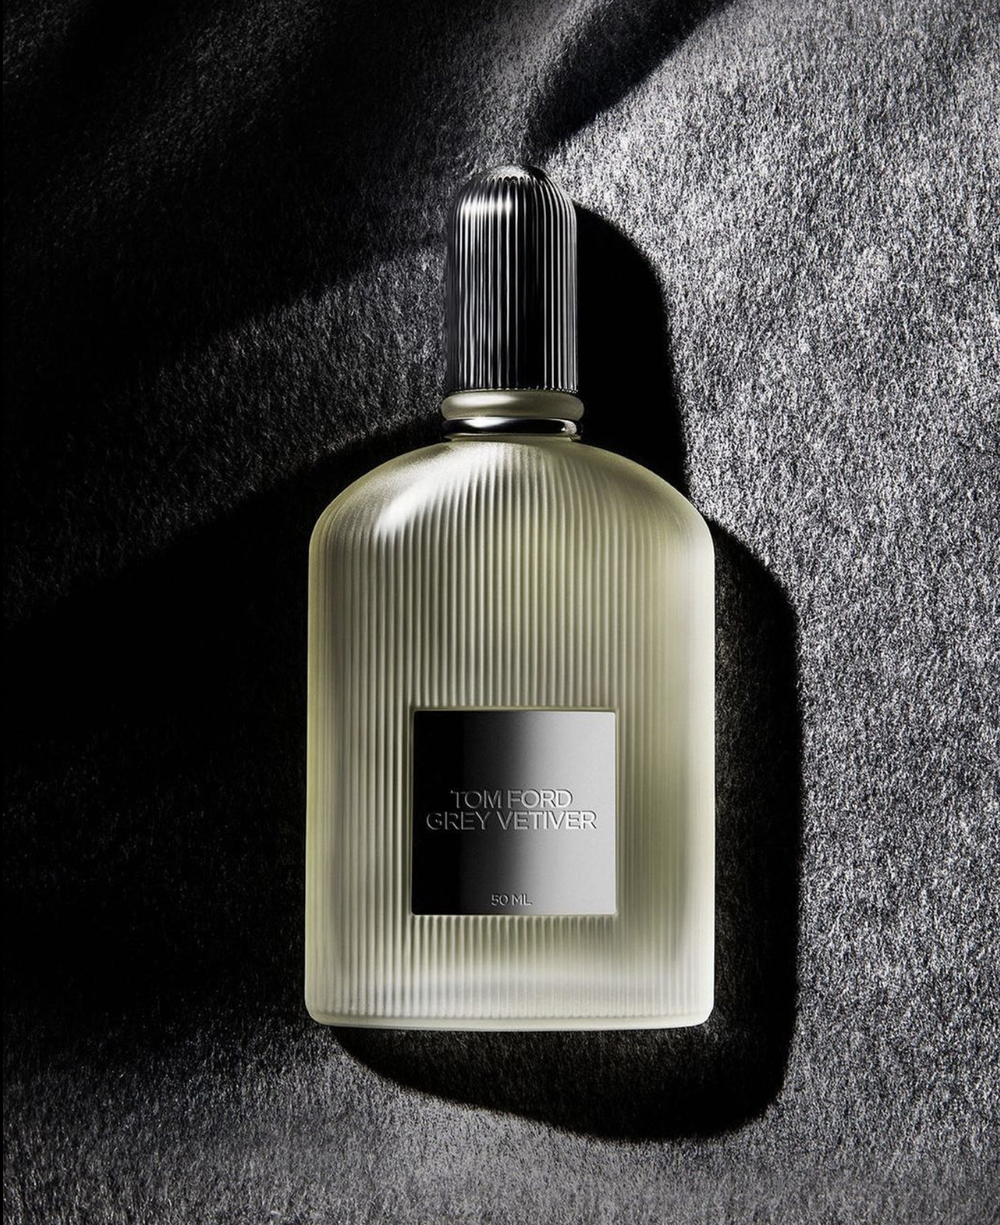 Tom-Ford-Grey-Vetiver-Parfum-Campaign-3-2023.png